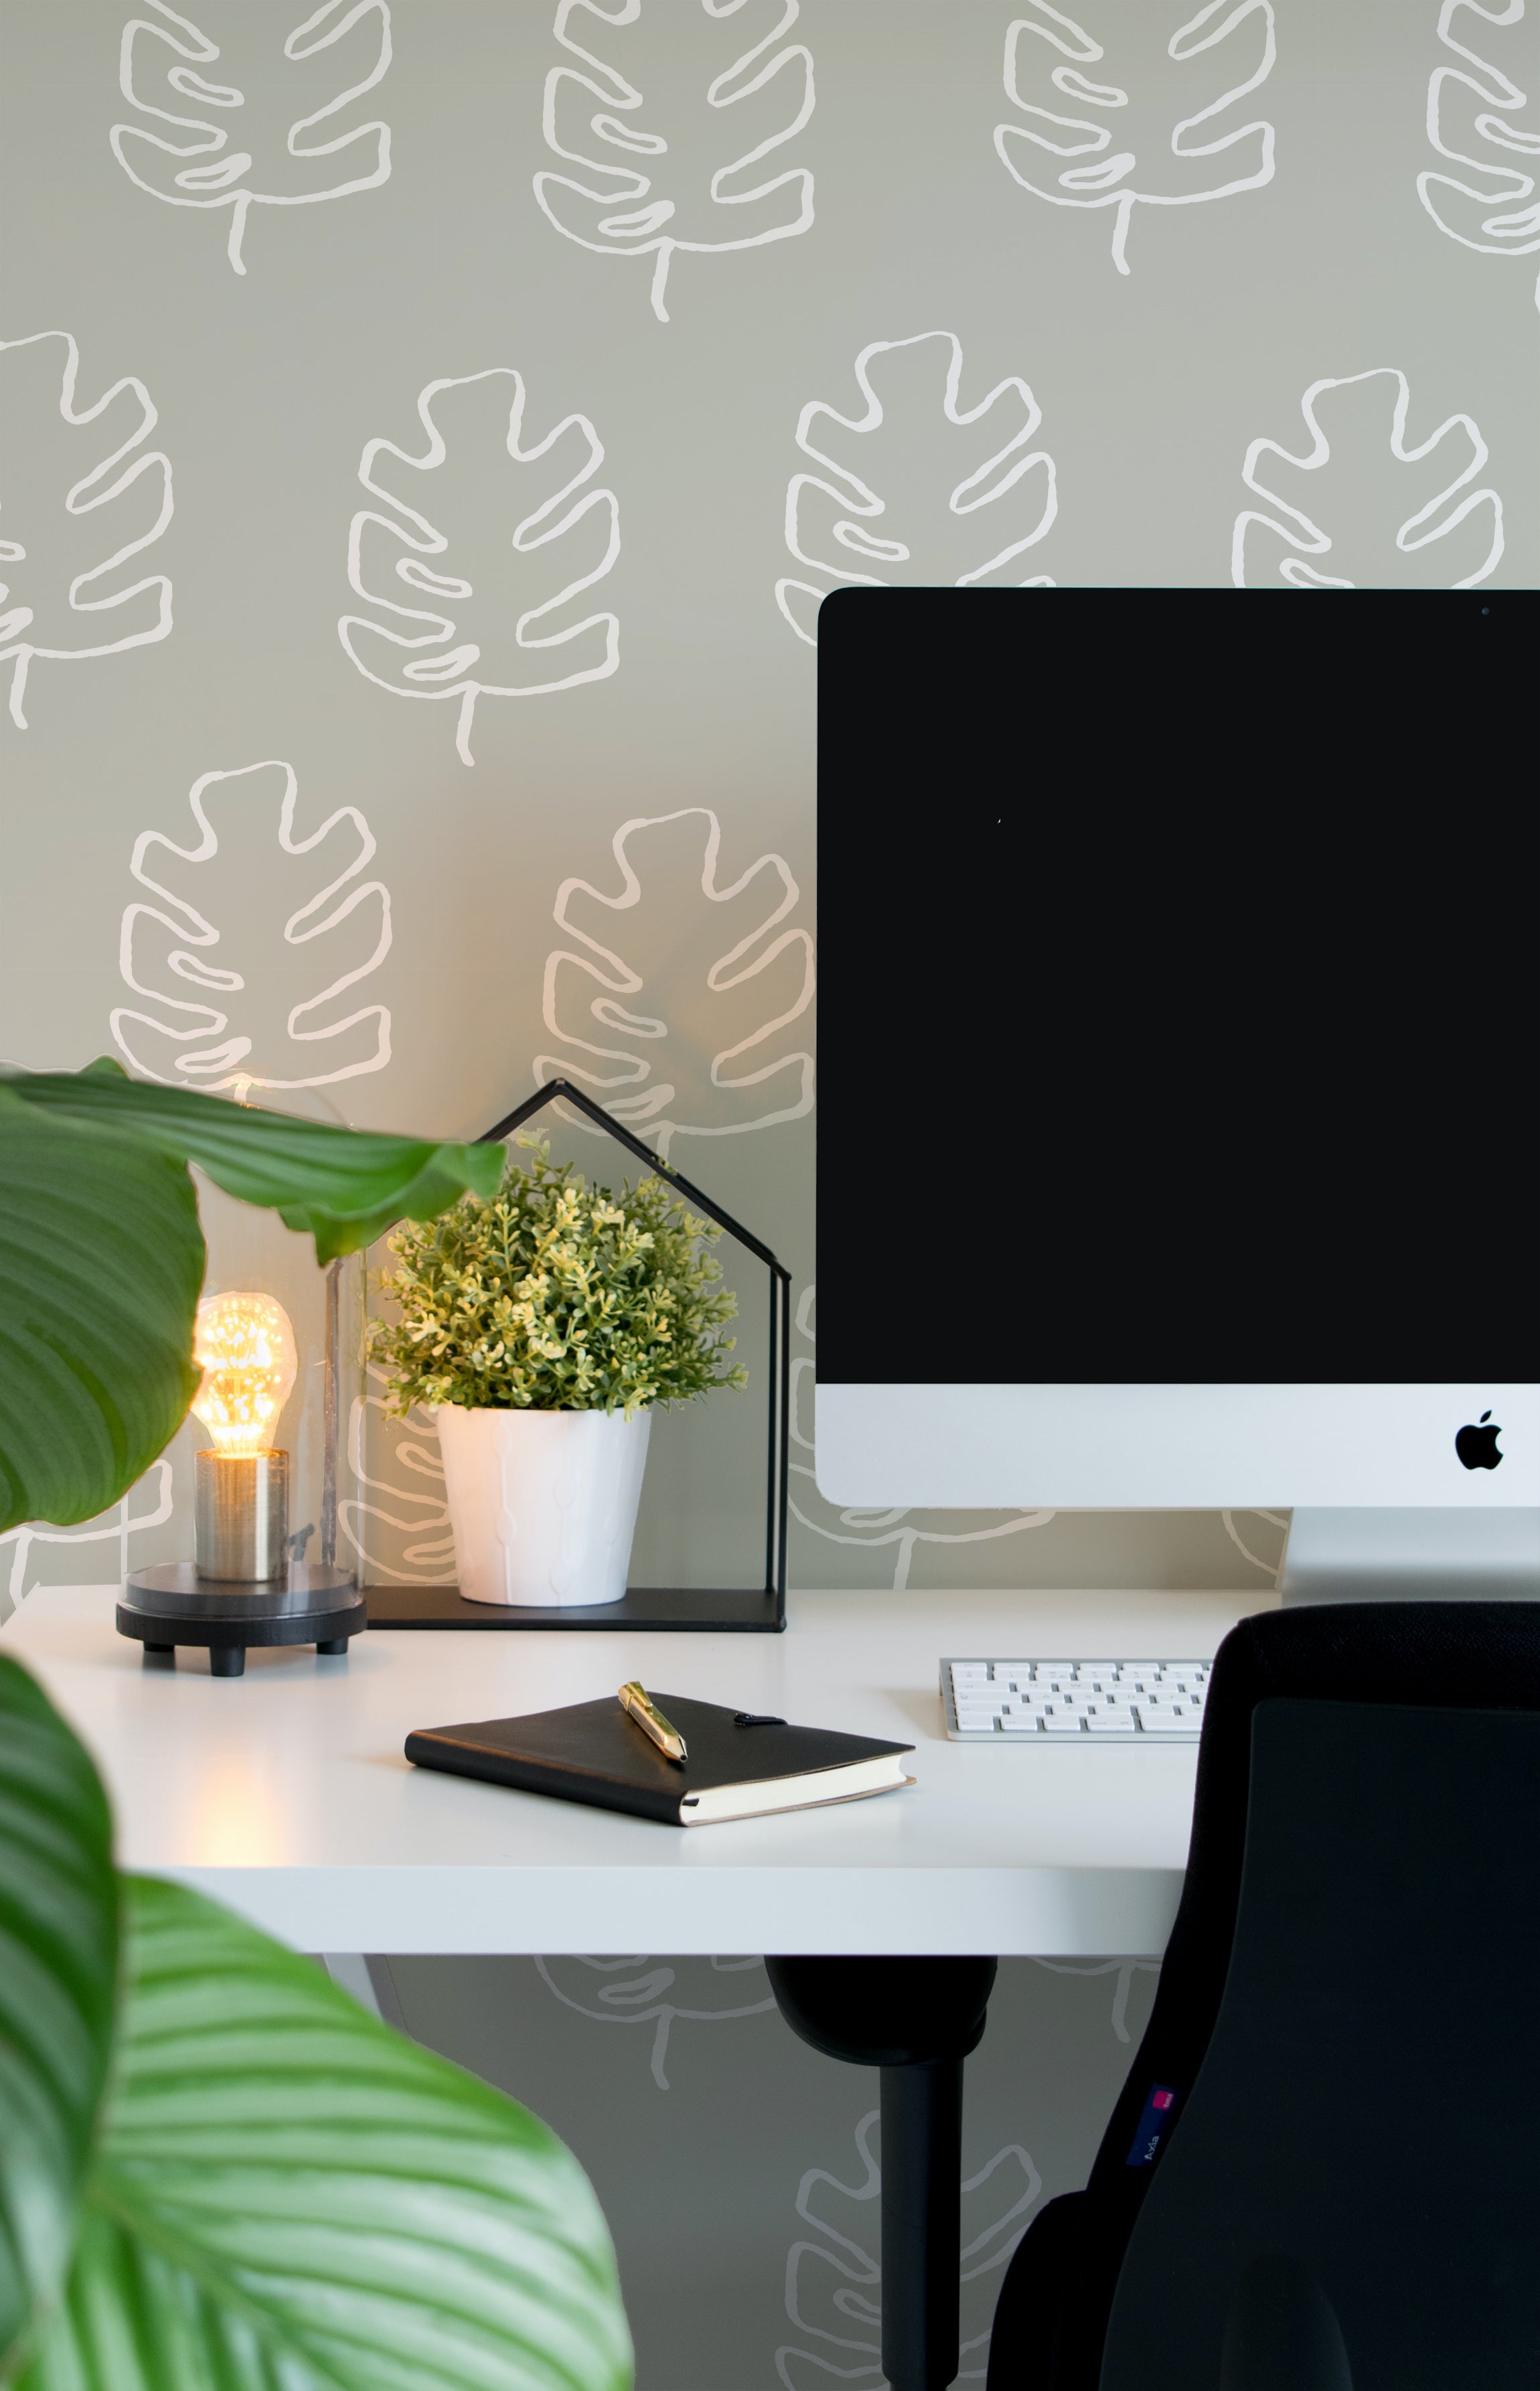 A stylish home office setup enhanced by the Palm Leaves Wallpaper, featuring a simple and elegant white palm leaf design on a grey backdrop. The wallpaper adds a touch of nature-inspired tranquility to the space, complemented by a modern desk and ambient lighting.